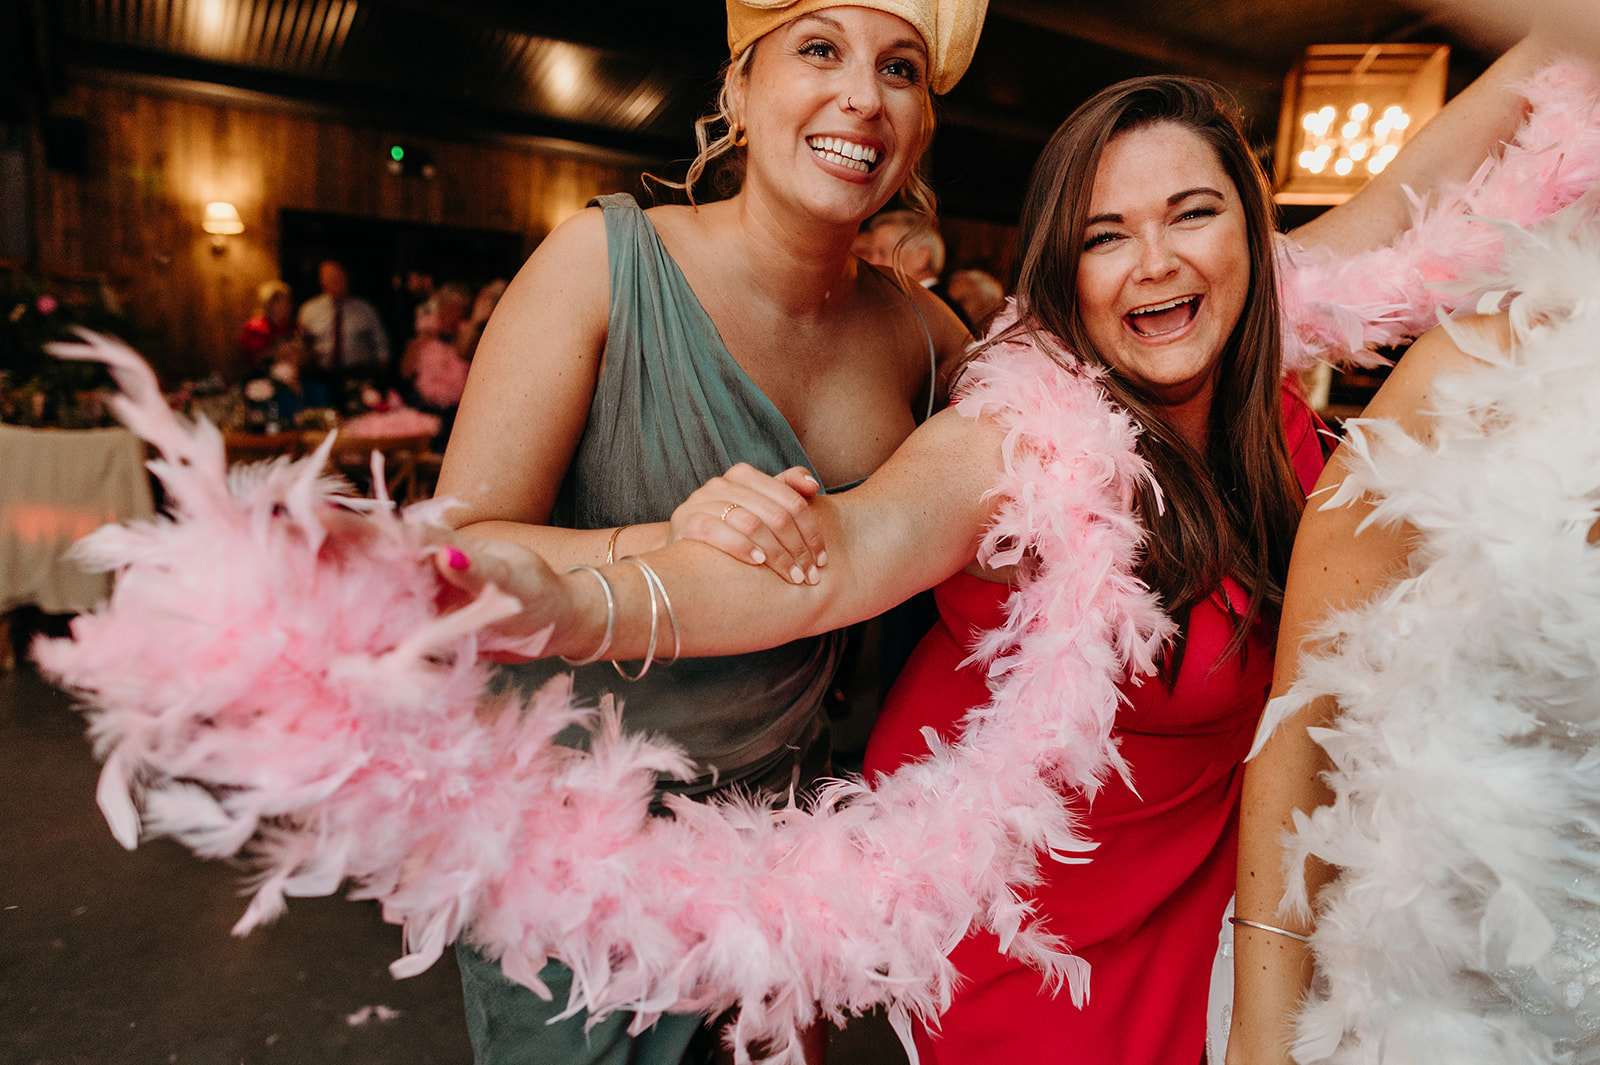 Wedding guests donning fun feathers, hats, and costumes as the barn wedding party reaches its peak.
